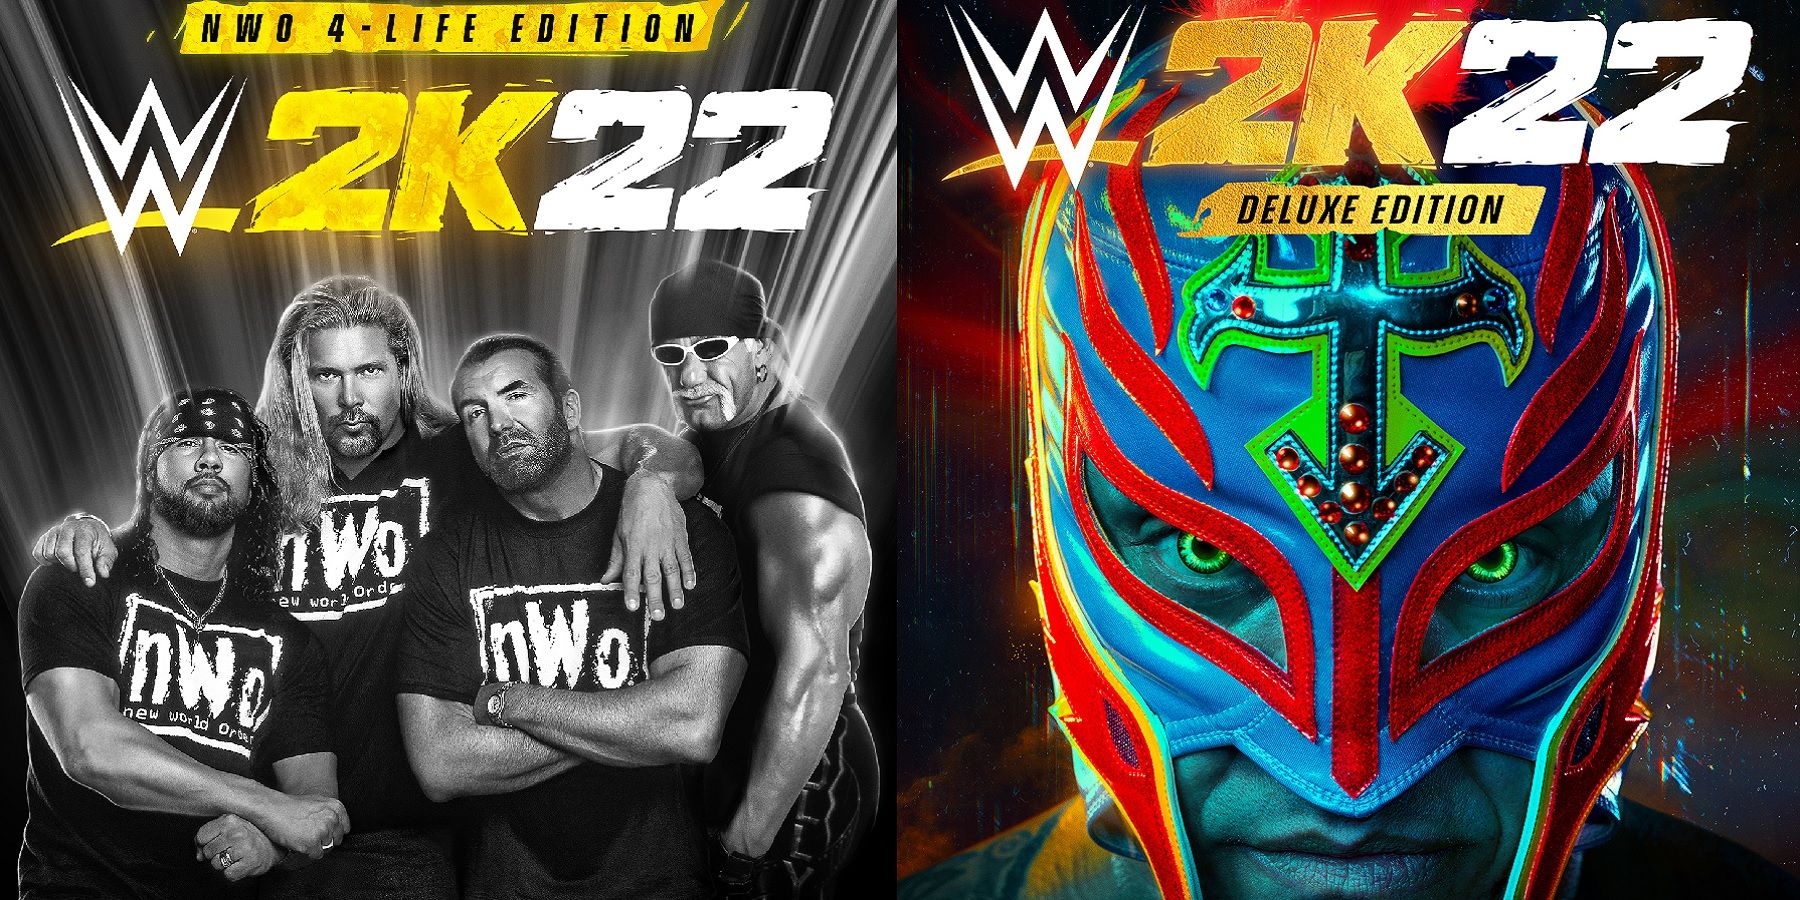 wwe 2k22 nwo 4 life and deluxe edition bundles